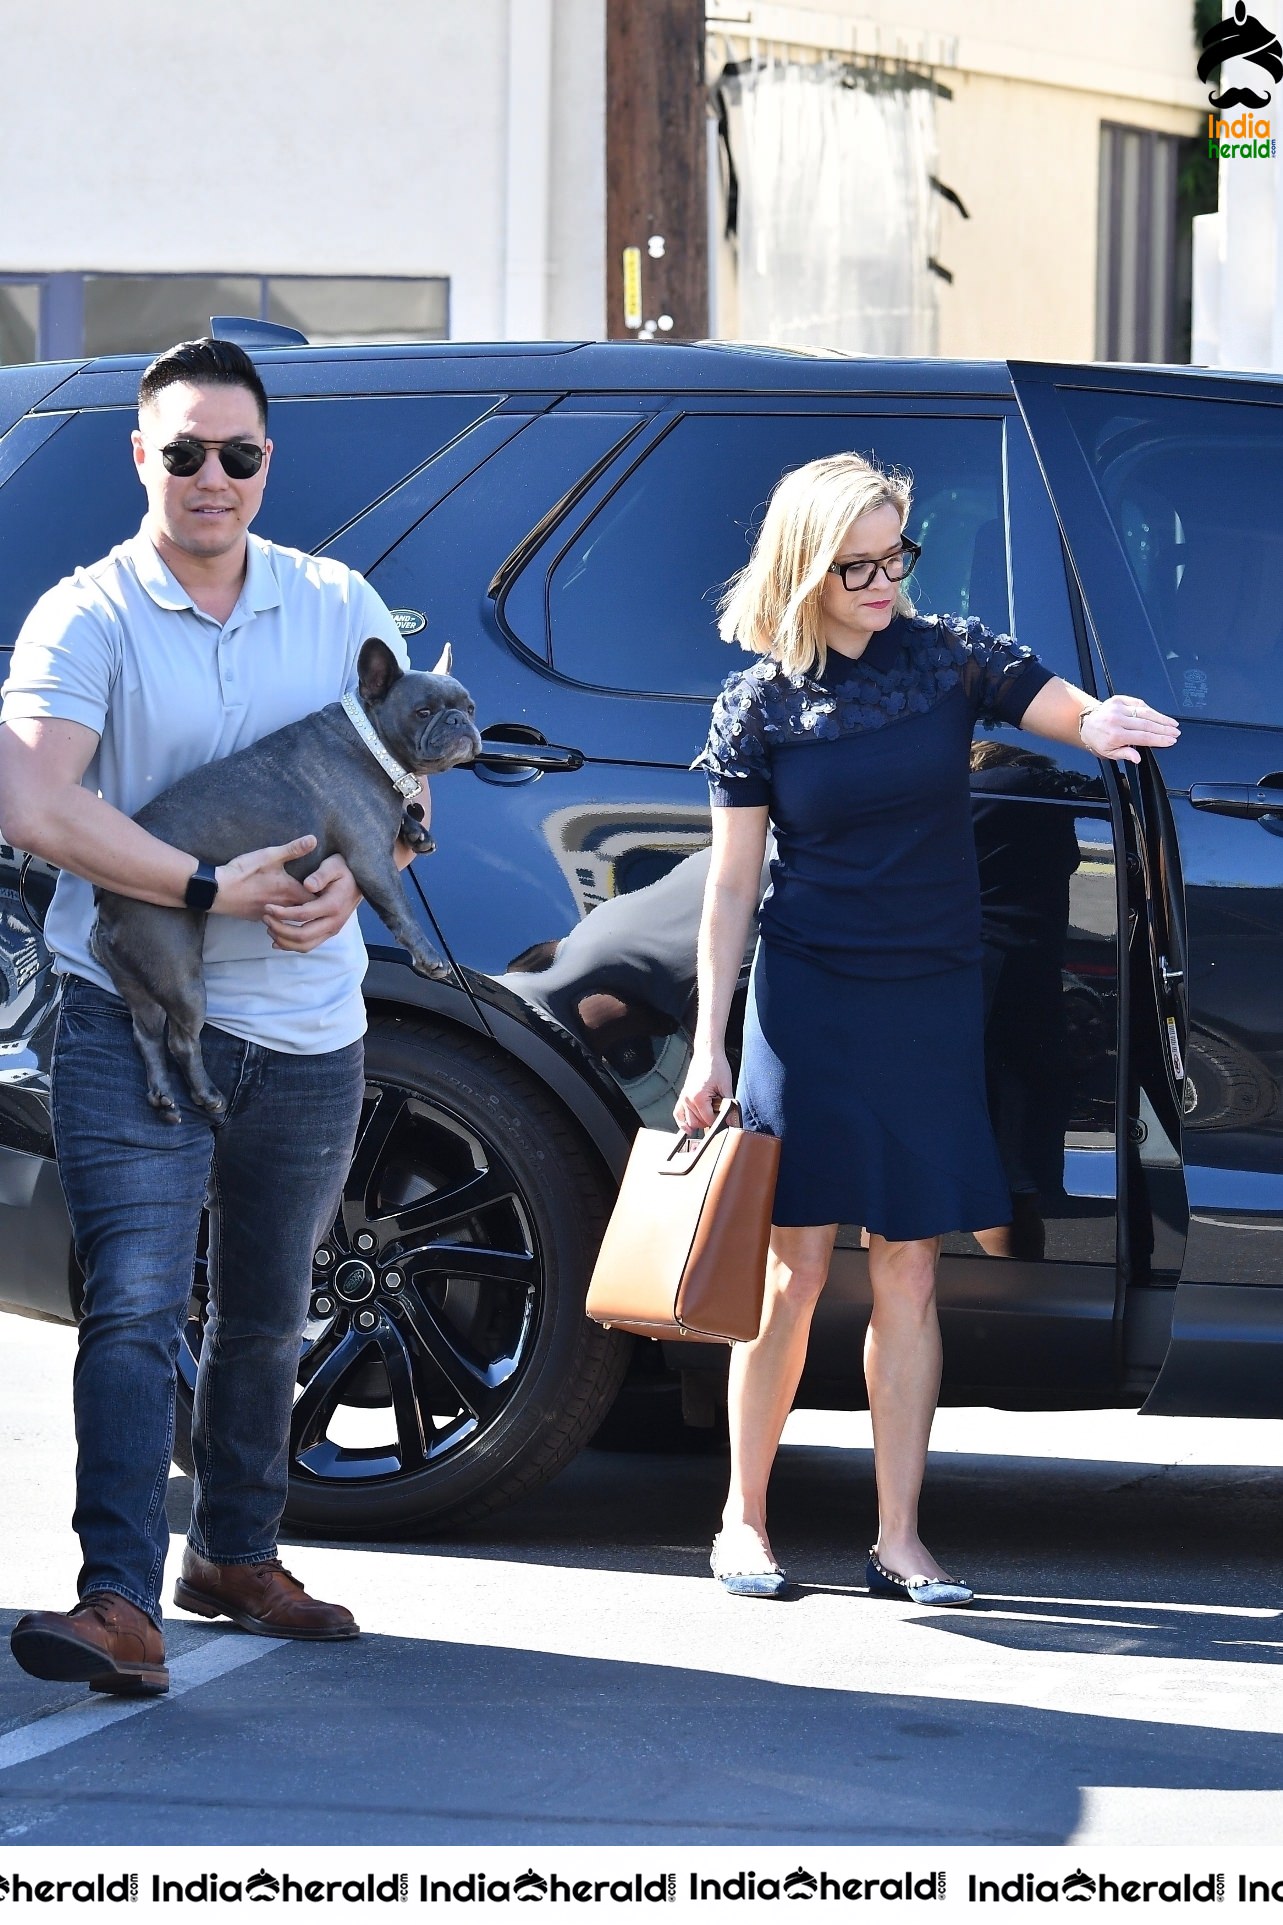 Reese Witherspoon caught by Paparazzi while out in Brentwood CA Set 2